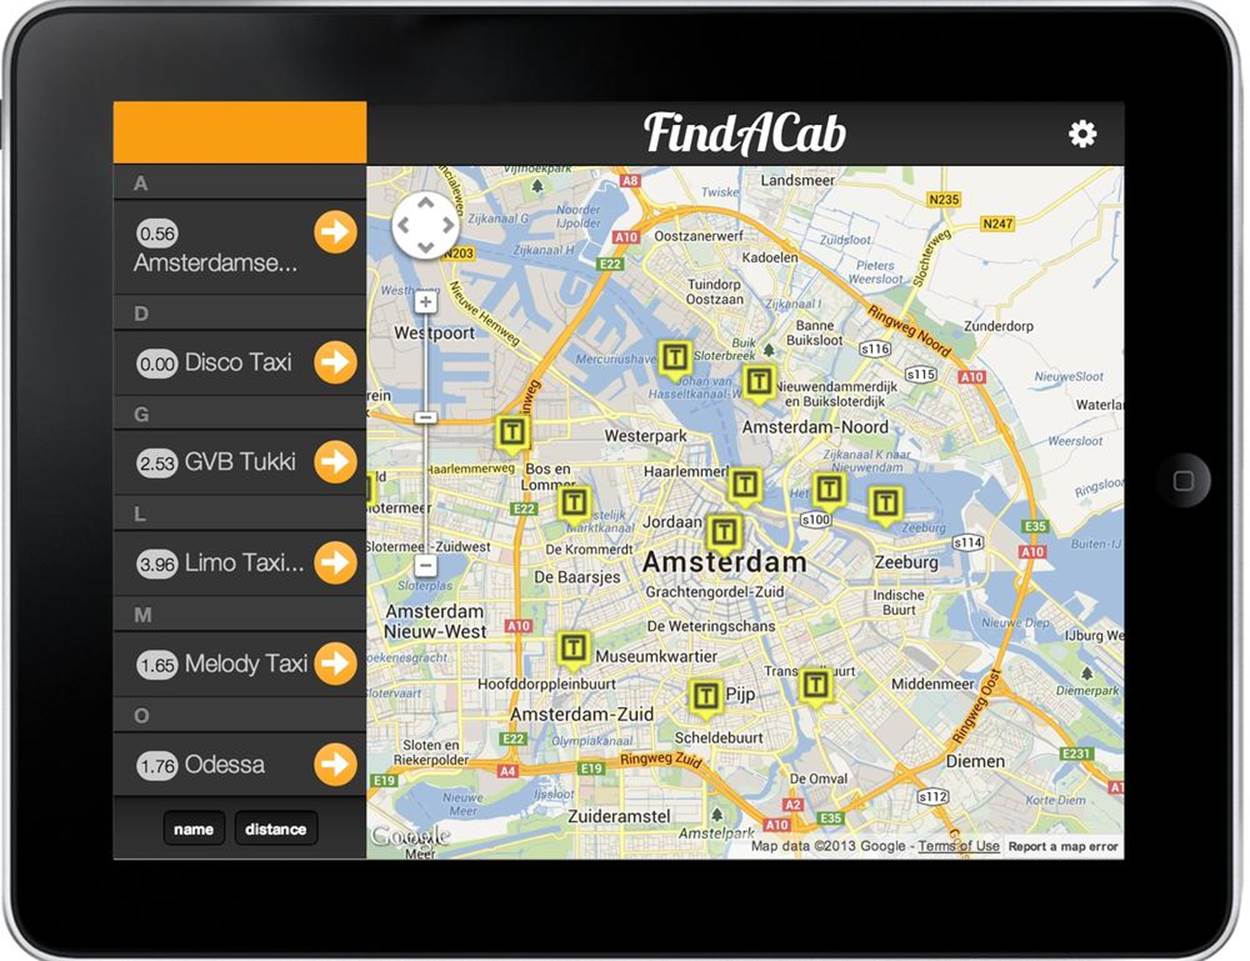 The FindACab app with a custom theme